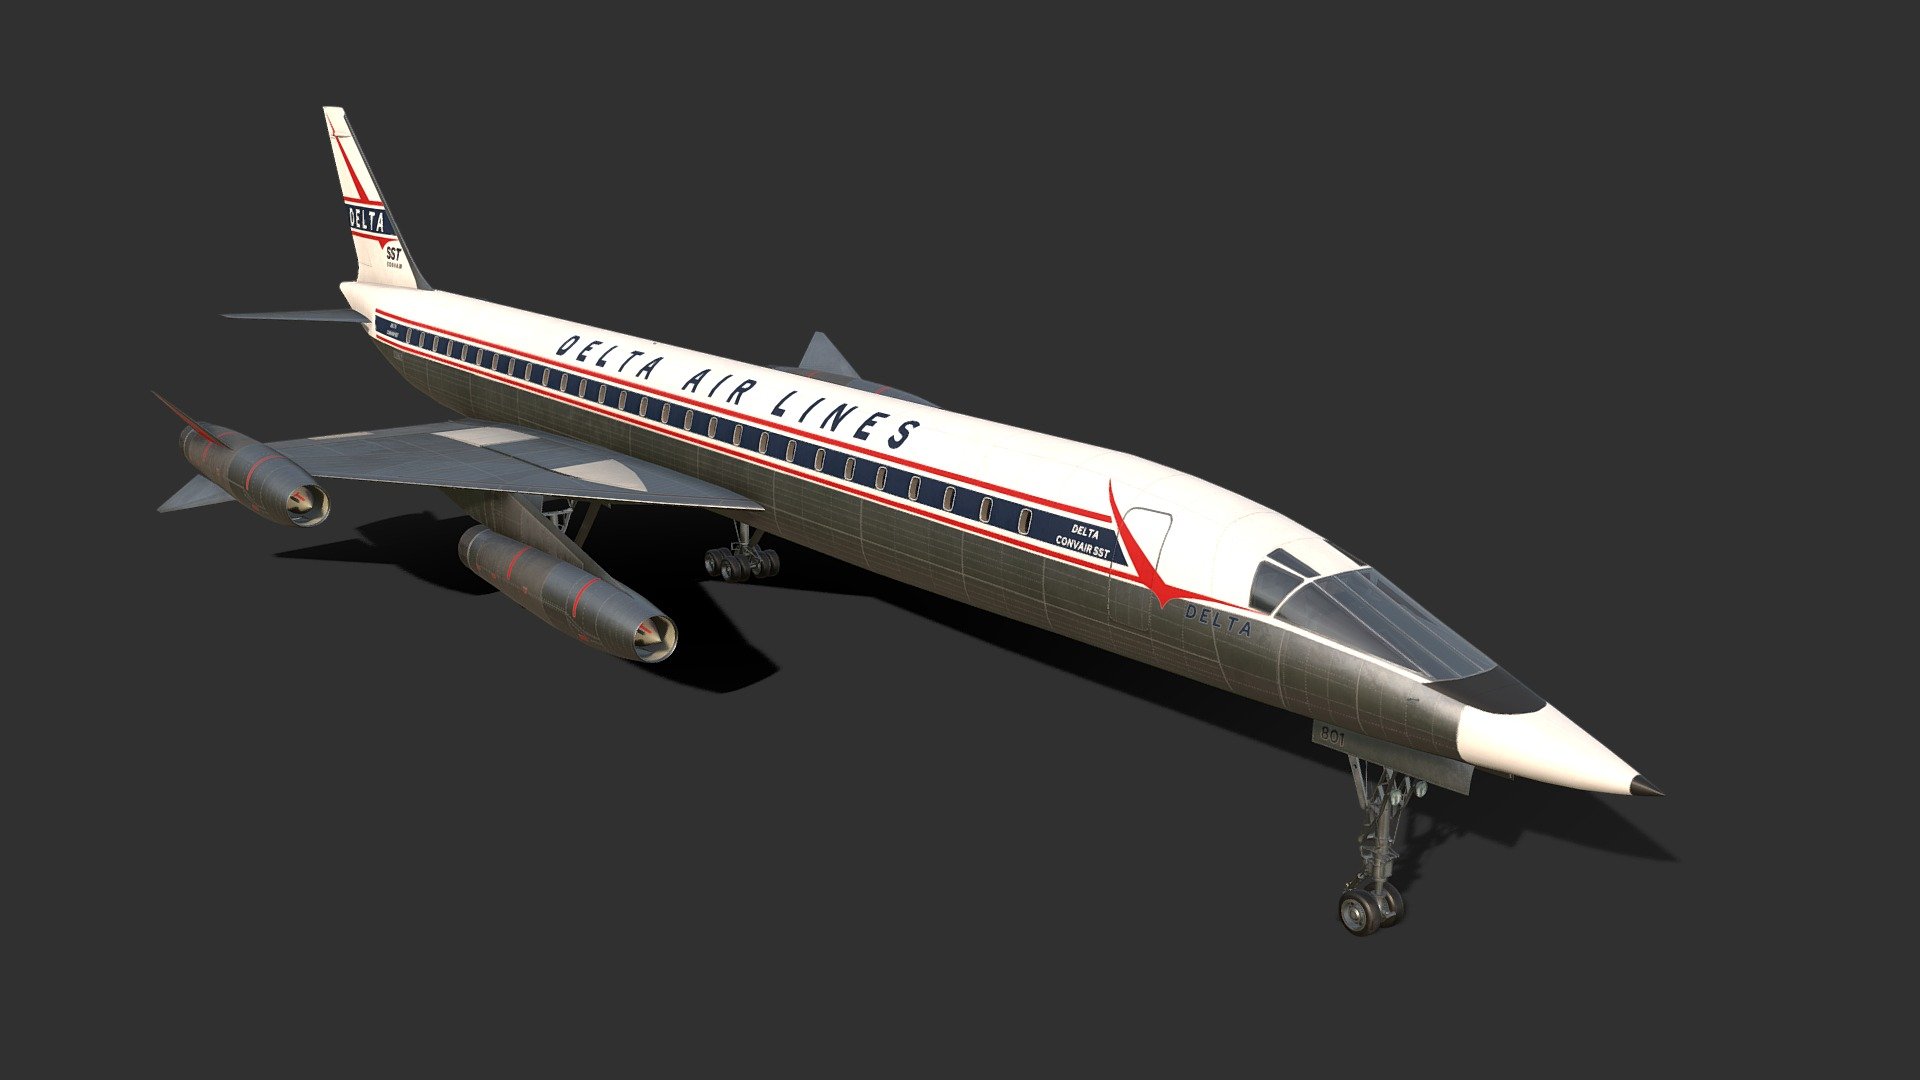 The Convair Model 58-9 was a proposed American supersonic transport, developed by the Convair division of General Dynamics and intended to carry fifty-two passengers at over Mach 2. Derived from the B-58 Hustler bomber, it was designed in 1961 but no examples of the type were ever built 3d model